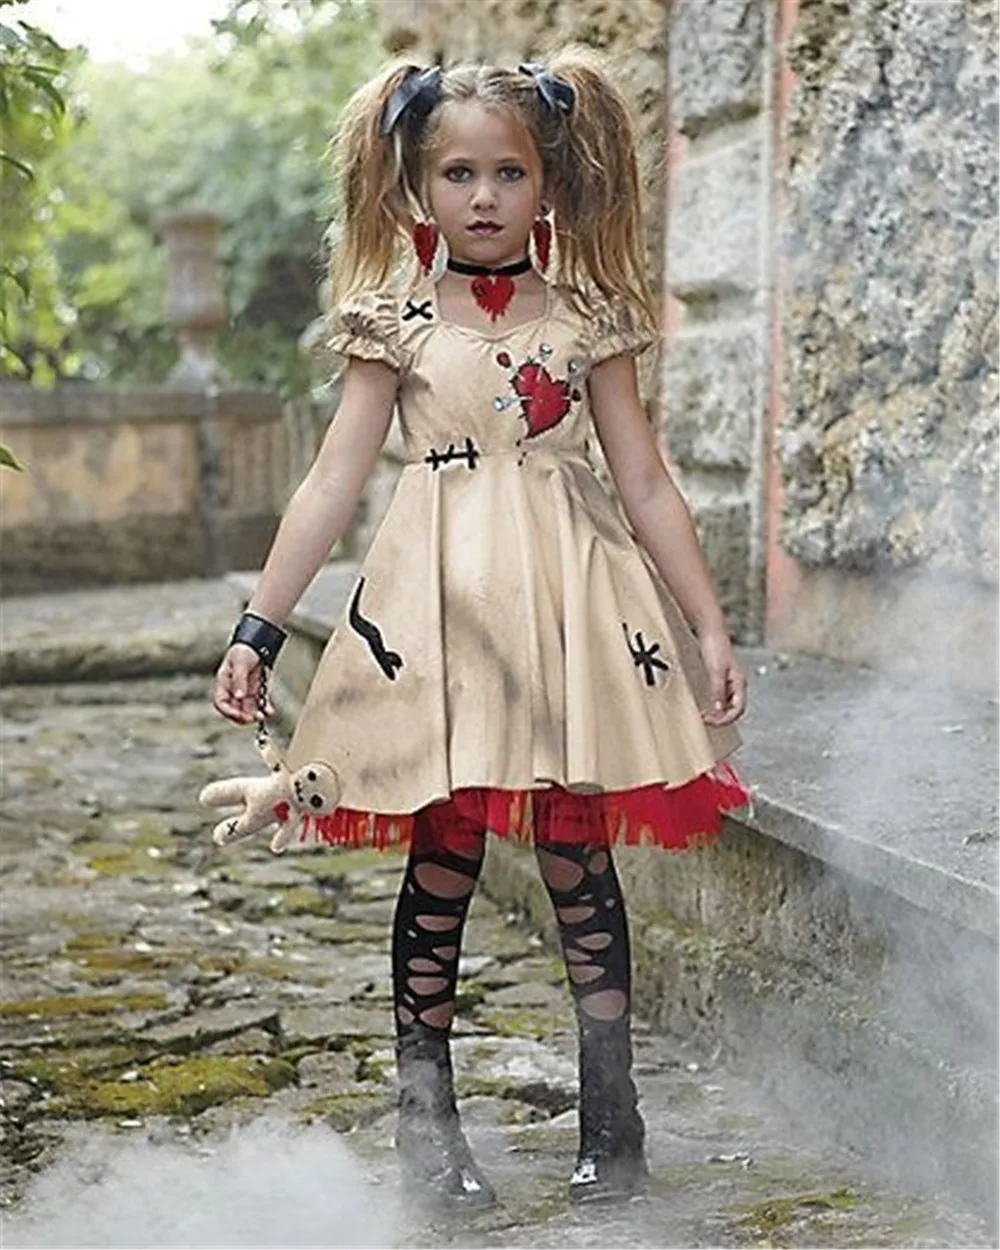 Cosplay&ware Wedding Ghost Bride Cosplay Voodoo Doll Costumes Women Adult Girls Vampire Harley Quinn Sexy Dress Halloween Costume -Outlet Maid Outfit Store